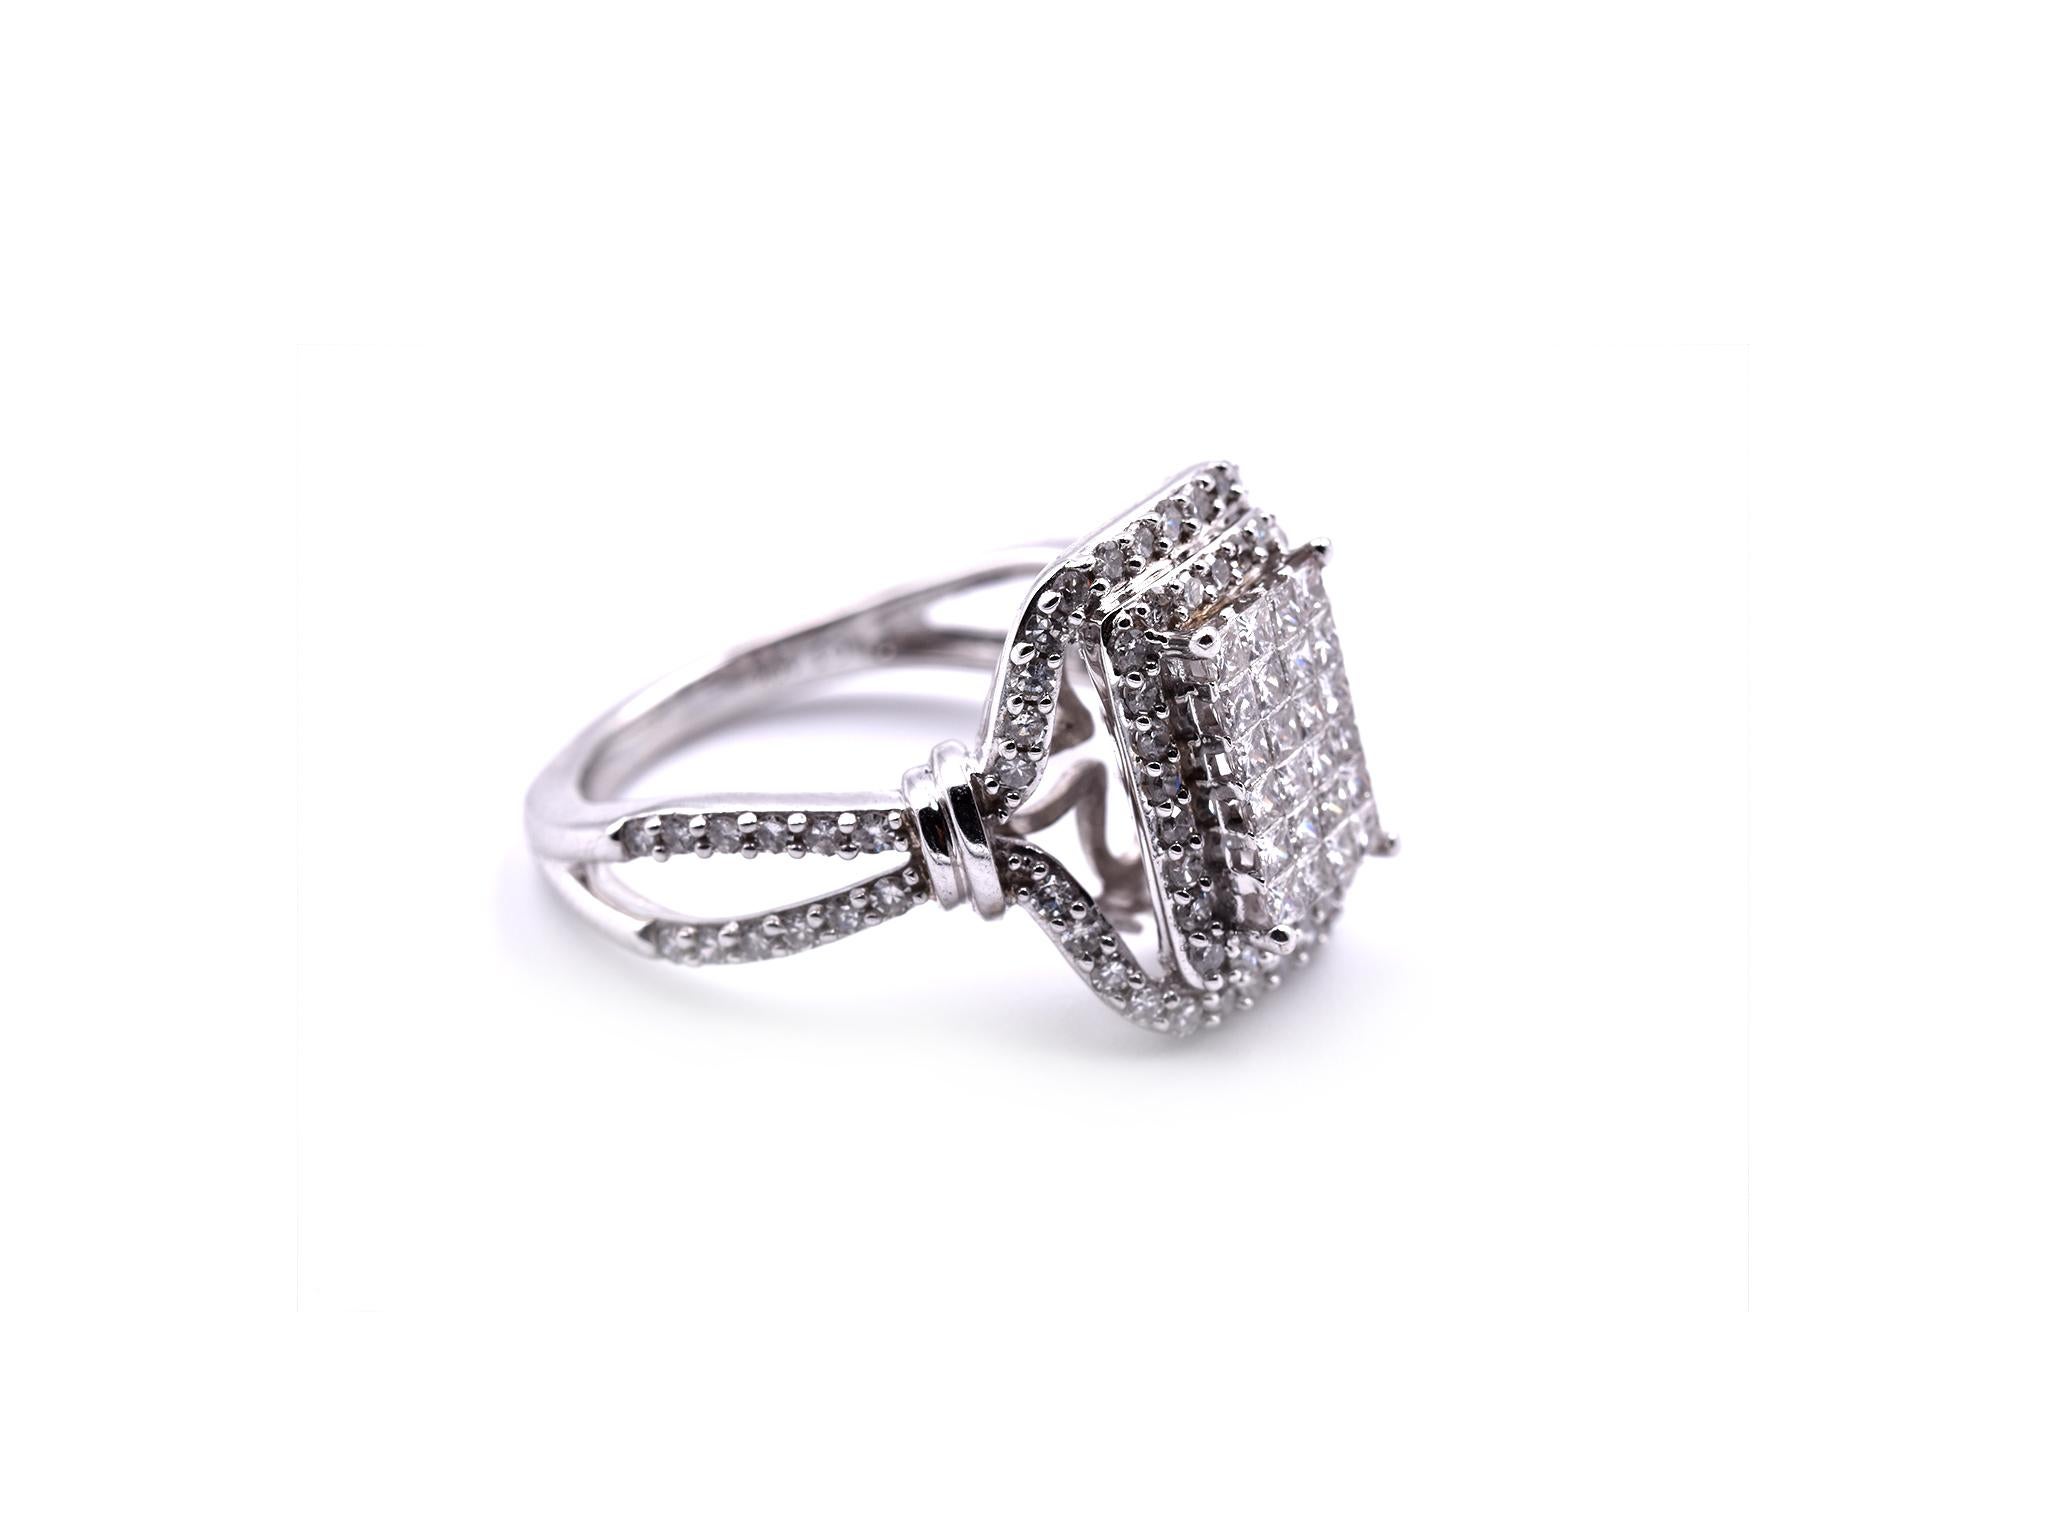 Designer: custom design
Material: 10k white gold
Diamonds: 104 diamonds = 1.15cttw
Color: G
Clarity: VS
Dimensions: ring top is 14.66mm by 13.05mm
Ring size: size 6 (please allow two additional shipping days for sizing requests)  
Weight: 4.52 grams 